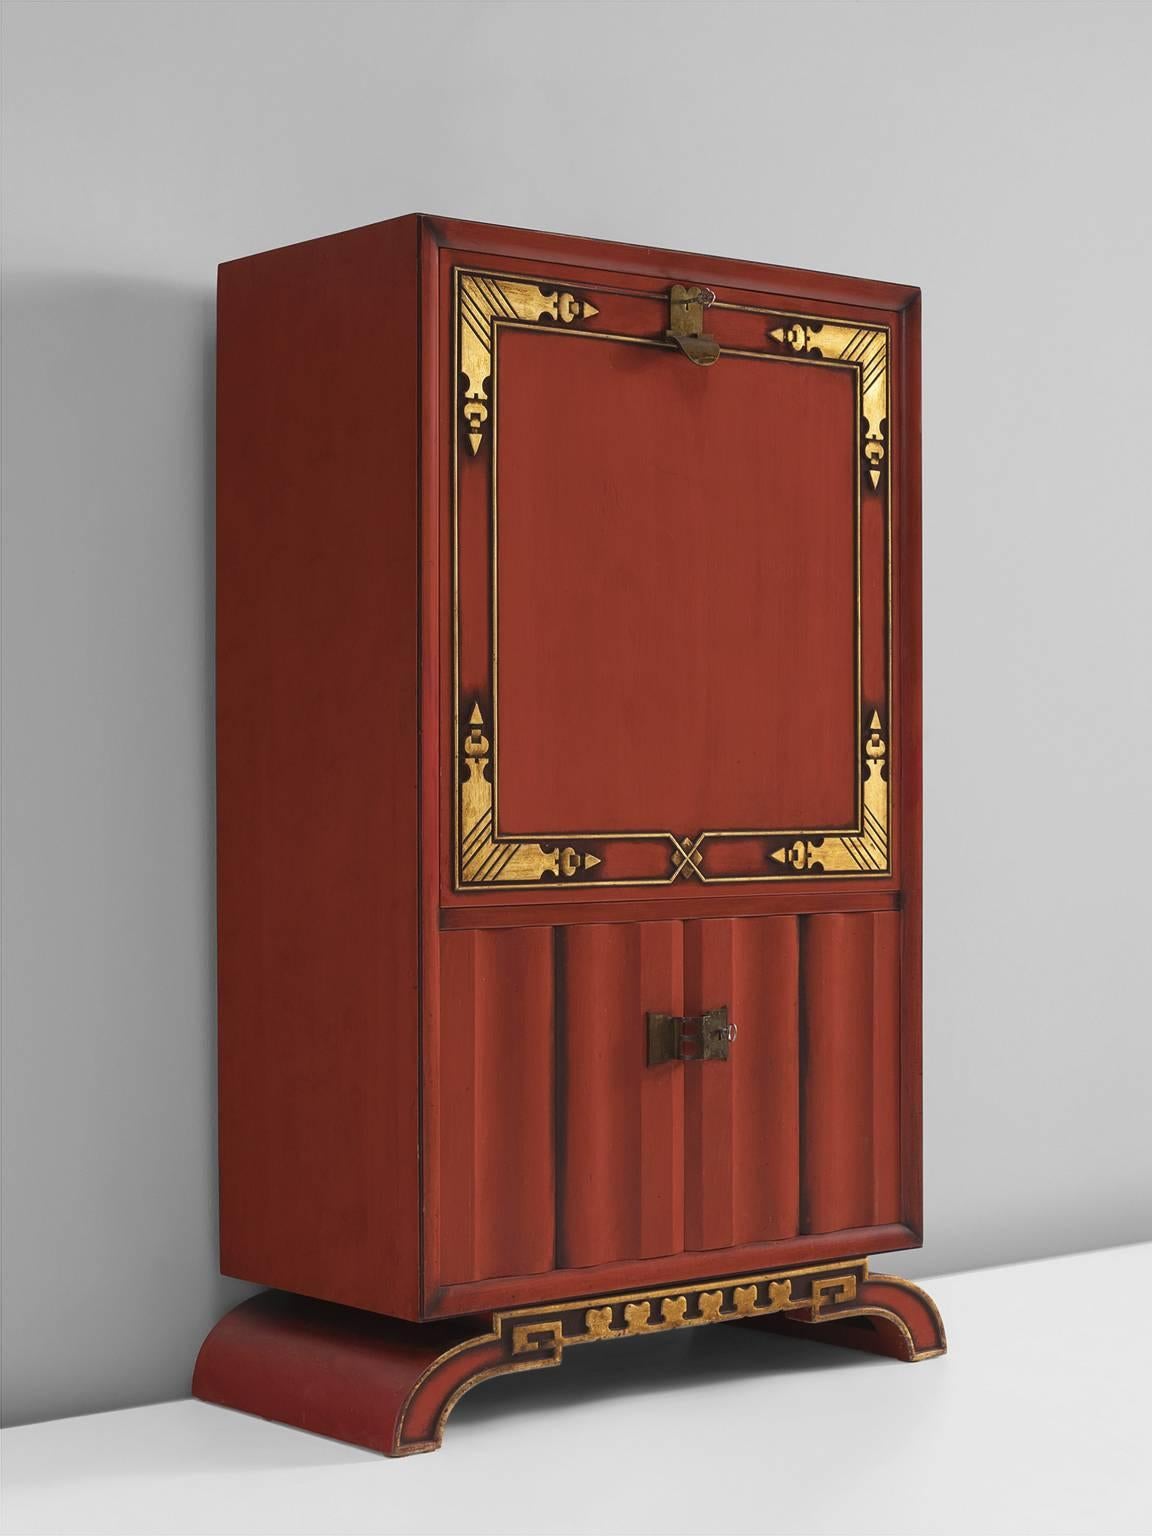 Bar cabinet, in red painted mahogany, walnut, woot, gold-leaf, brass and glass, by Charles Van Beerleire, Belgium, 1930s. 

This chinoiserie Art Deco cabinet is produced in Belgium, circa 1930s. The front is decorated with graphical and Oriental